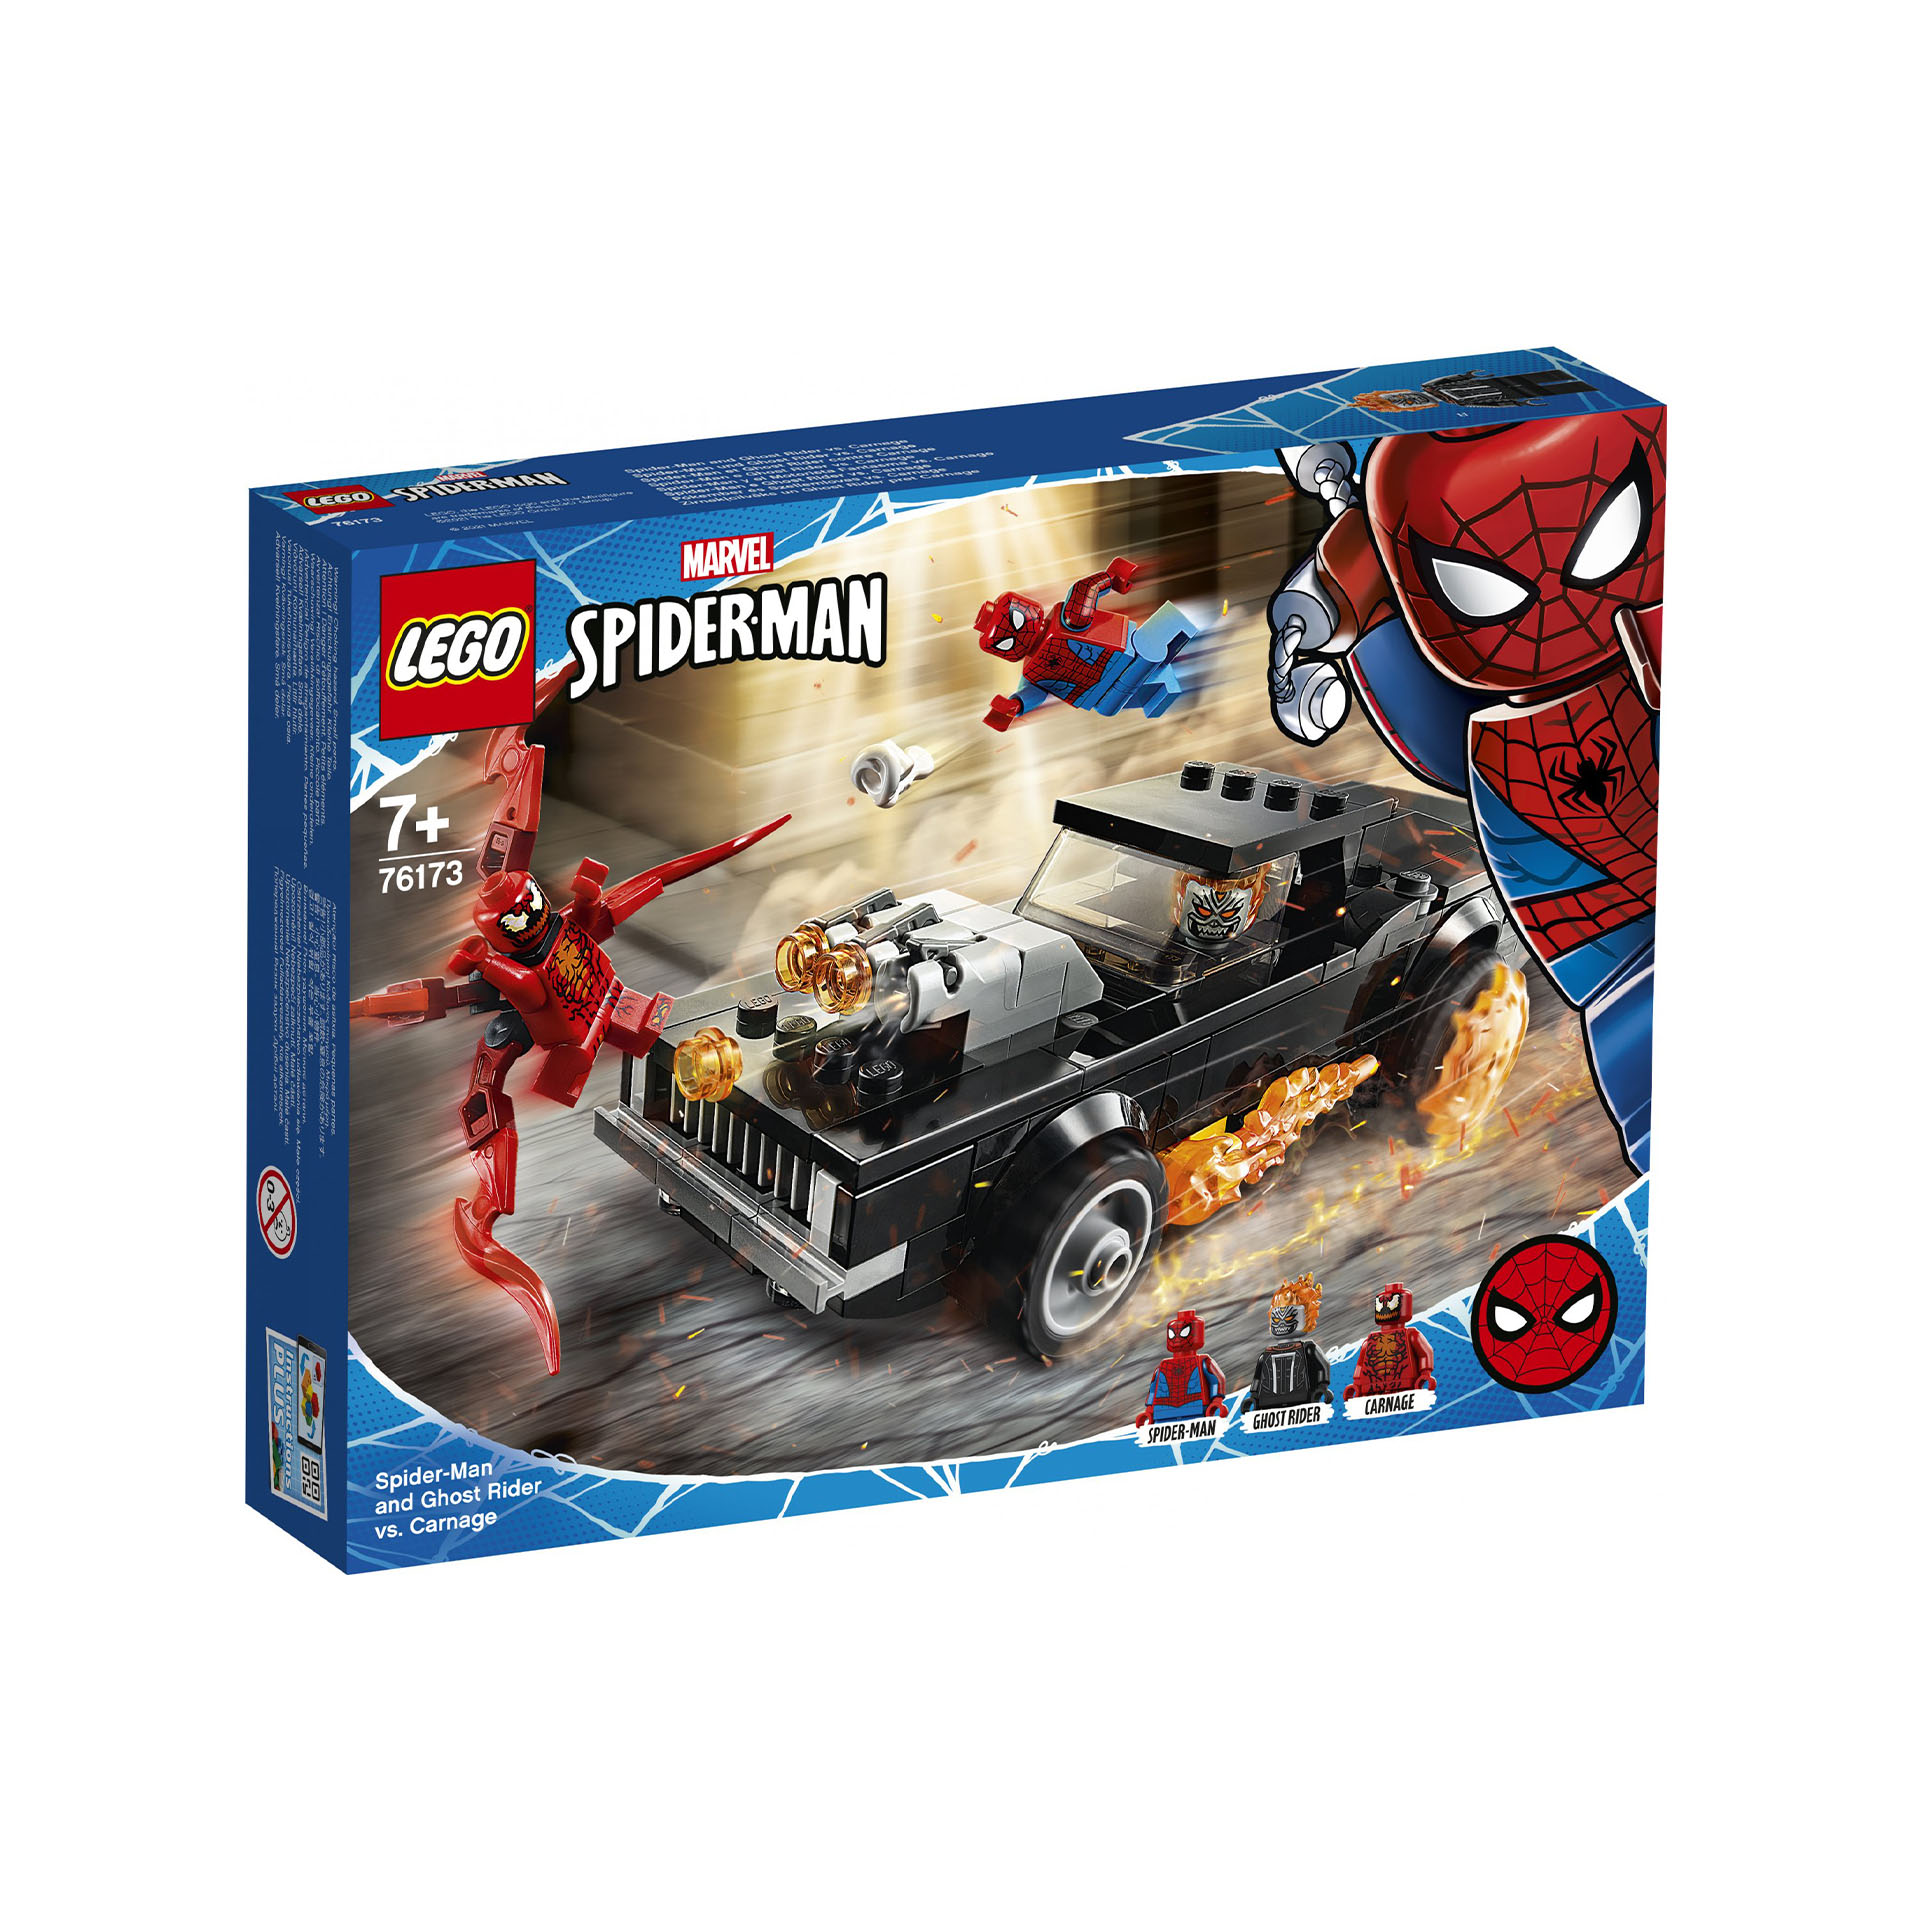 LEGO Super Heroes Spider-Man e Ghost Rider vs. Carnage 76173, , large